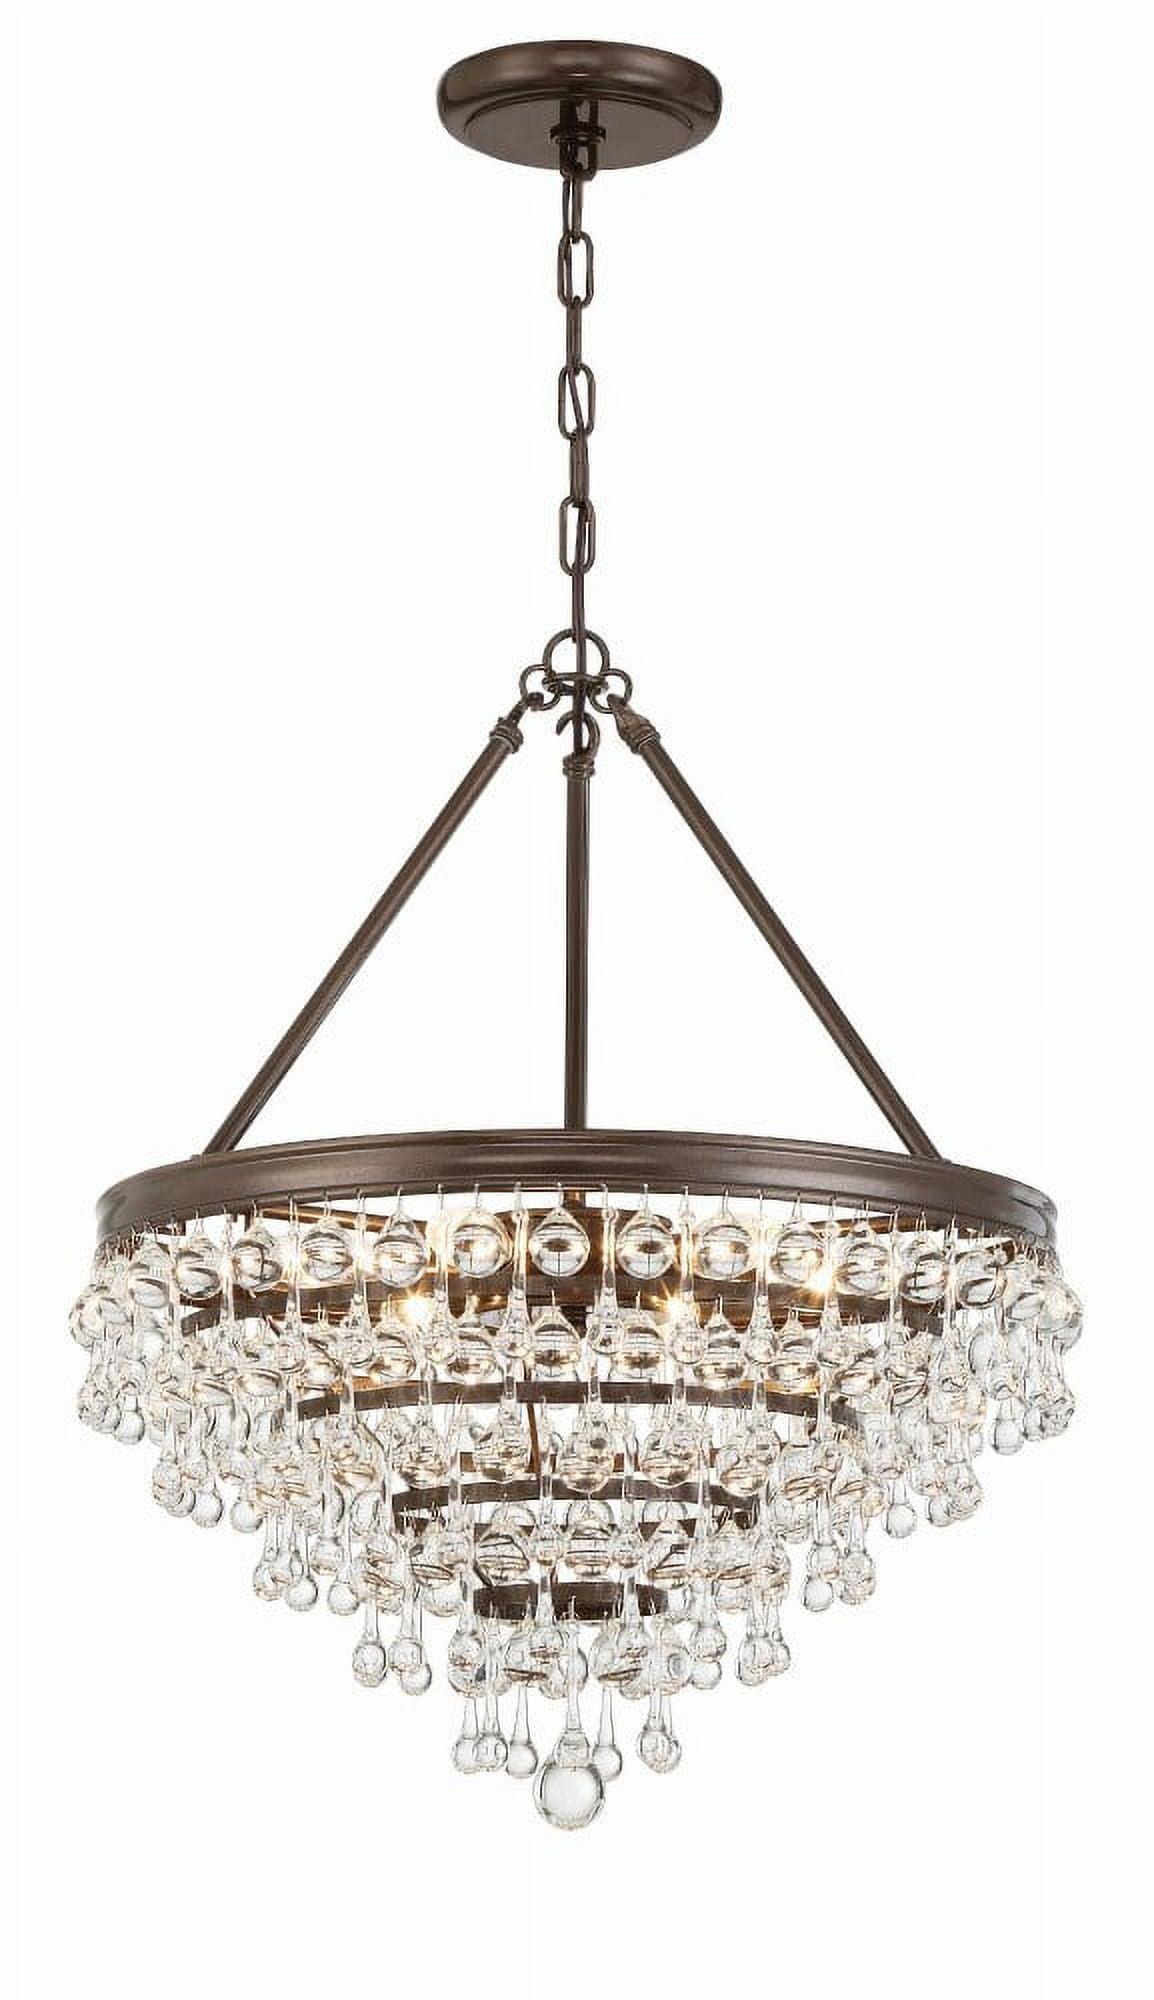 Vibrant Bronze 6-Light Chandelier with Crystal Drops and Balls